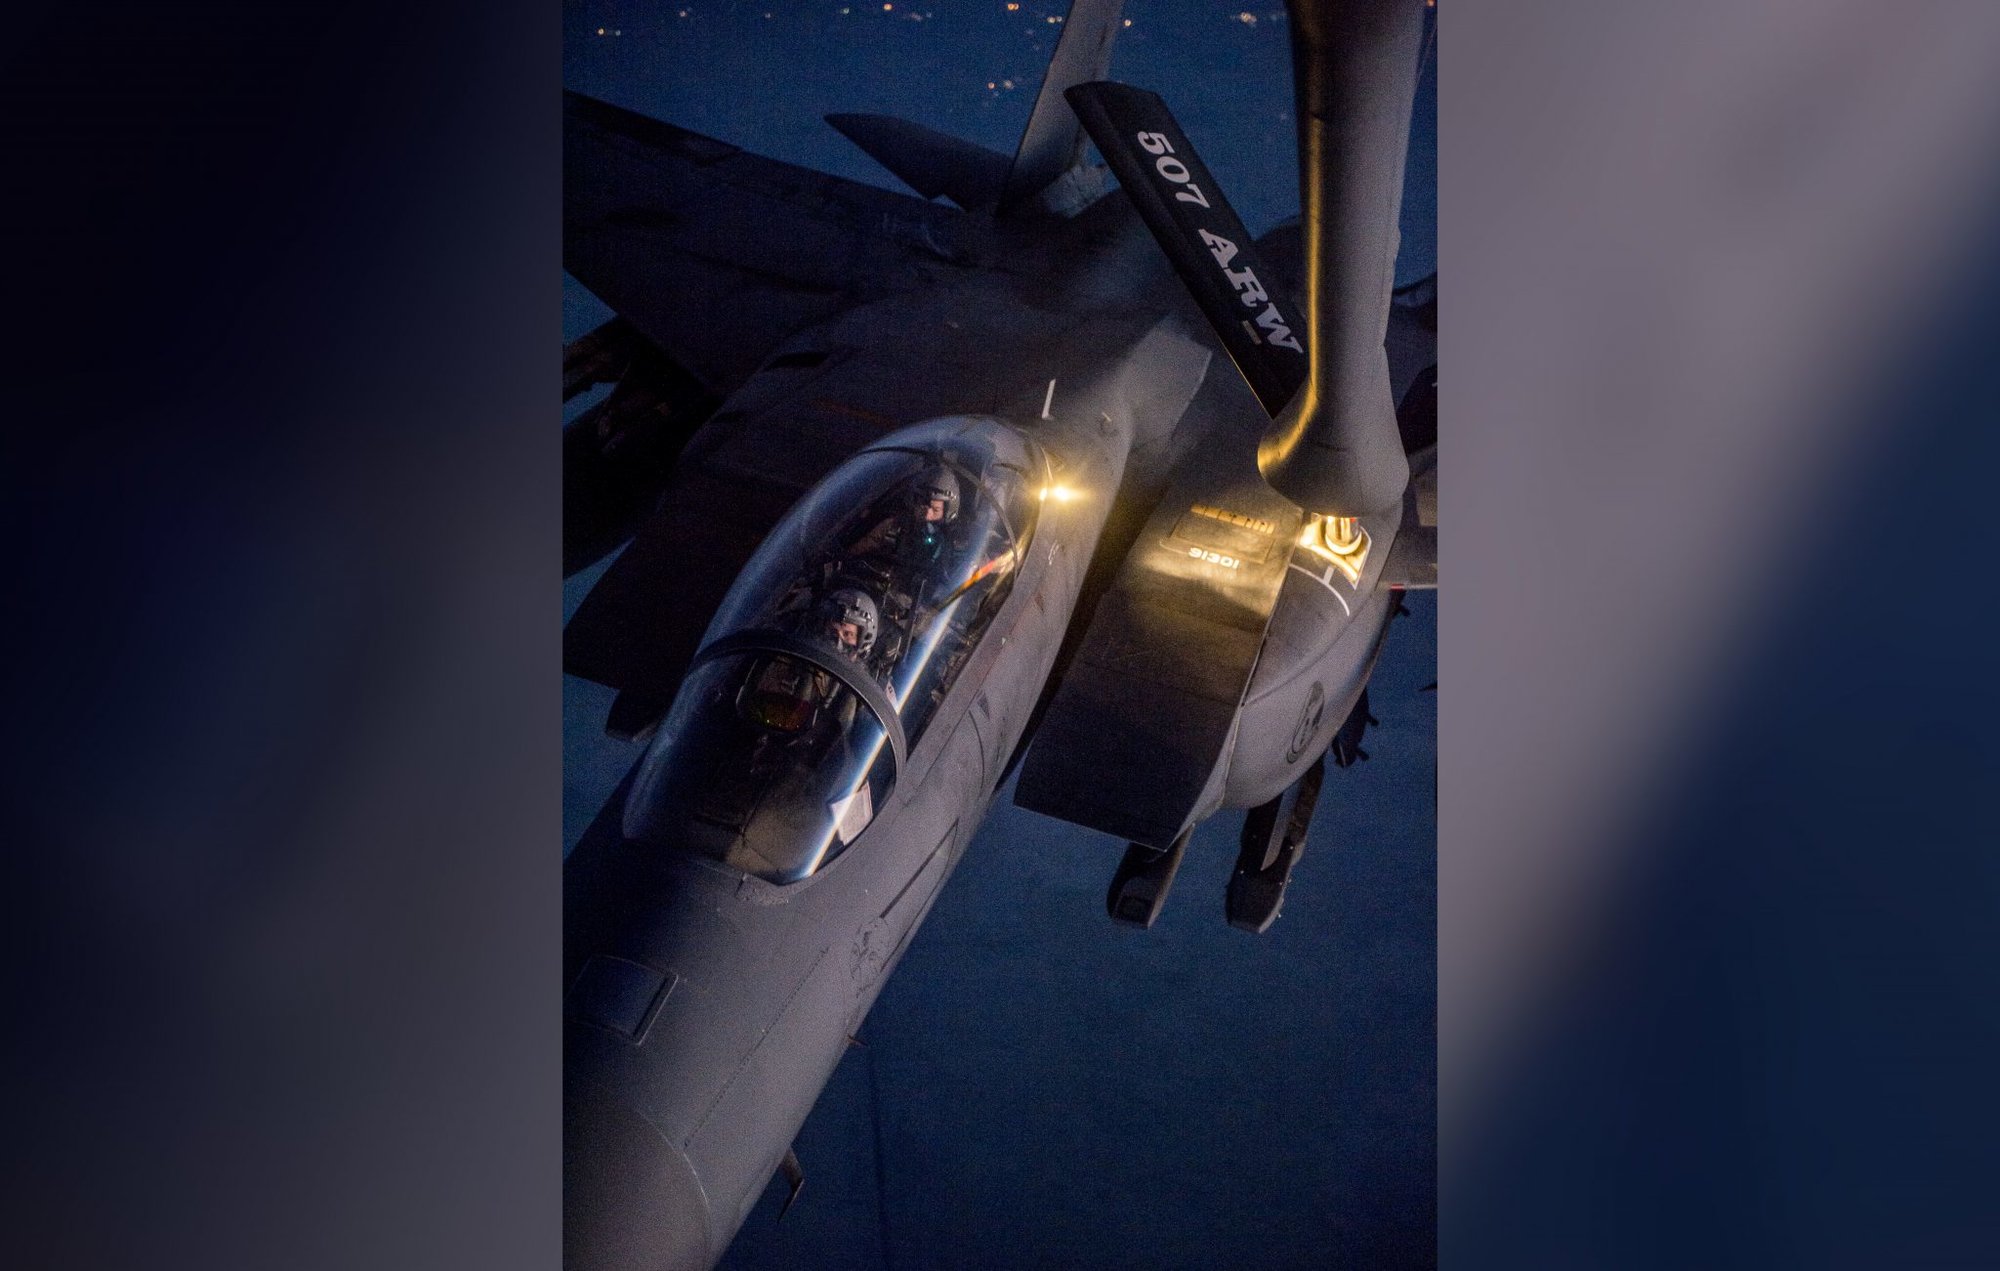 A U.S. Air Force F-15E Strike Eagle receives fuel from a KC-135 Stratotanker over northern Iraq after conducting airstrikes in Syria, Sept. 23, 2014. These aircraft were part of a large coalition strike package that was the first to strike ISIL targets in Syria. (U.S. Air Force photo by Senior Airman Matthew Bruch/Released)